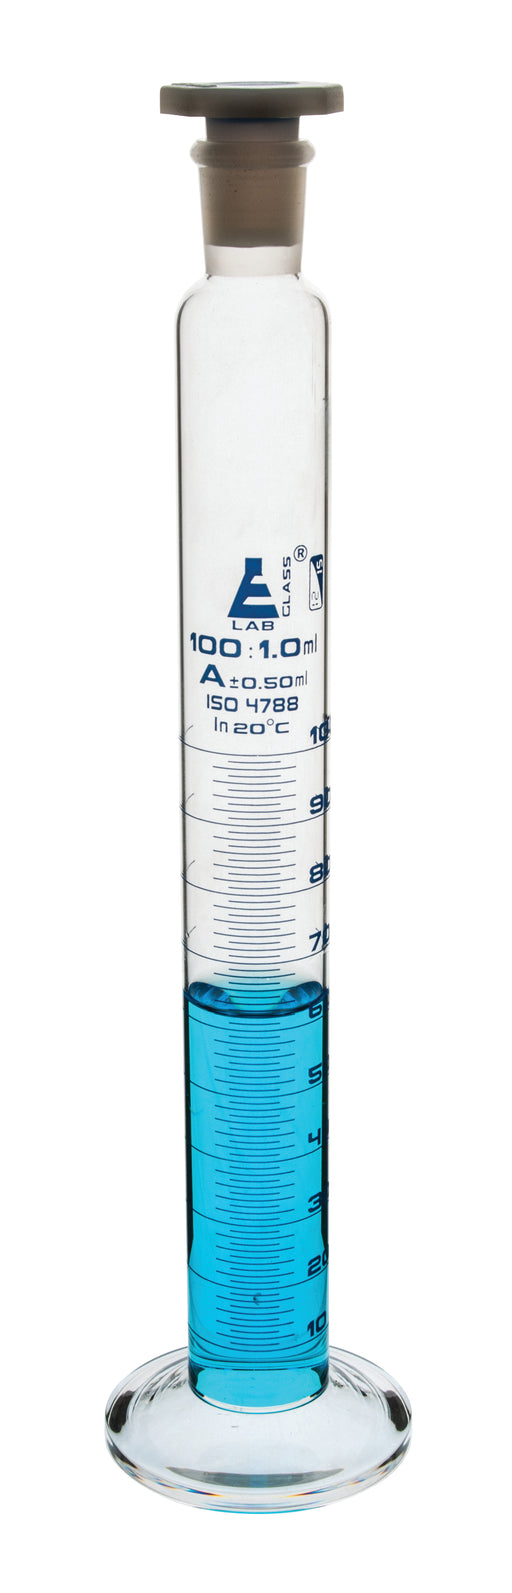 Cylinder Measuring Graduated with stopper, Class 'A'-100ml, Blue Graduation